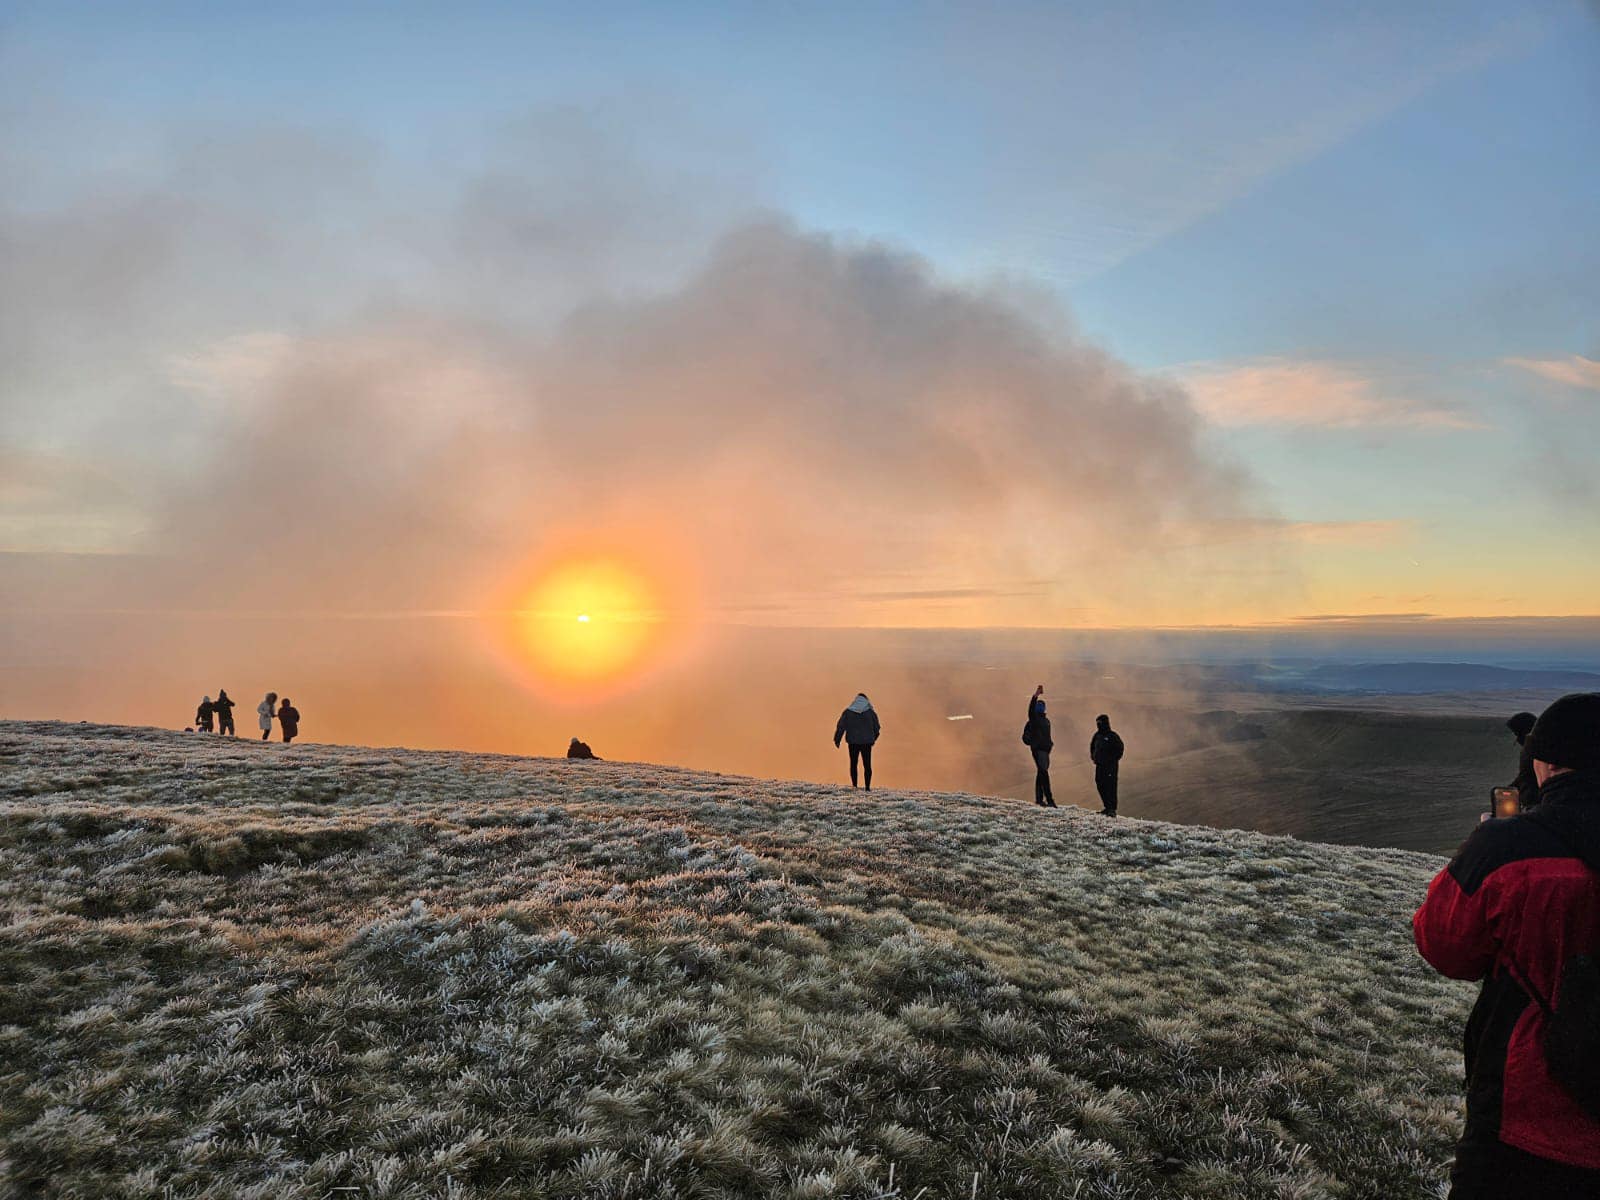 Sunrise on Pen Y Fan, Sunrise on Pen Y Fan in January &#8211; cold, icy, busy BUT beautiful and glorious!, Welsh Man Walking